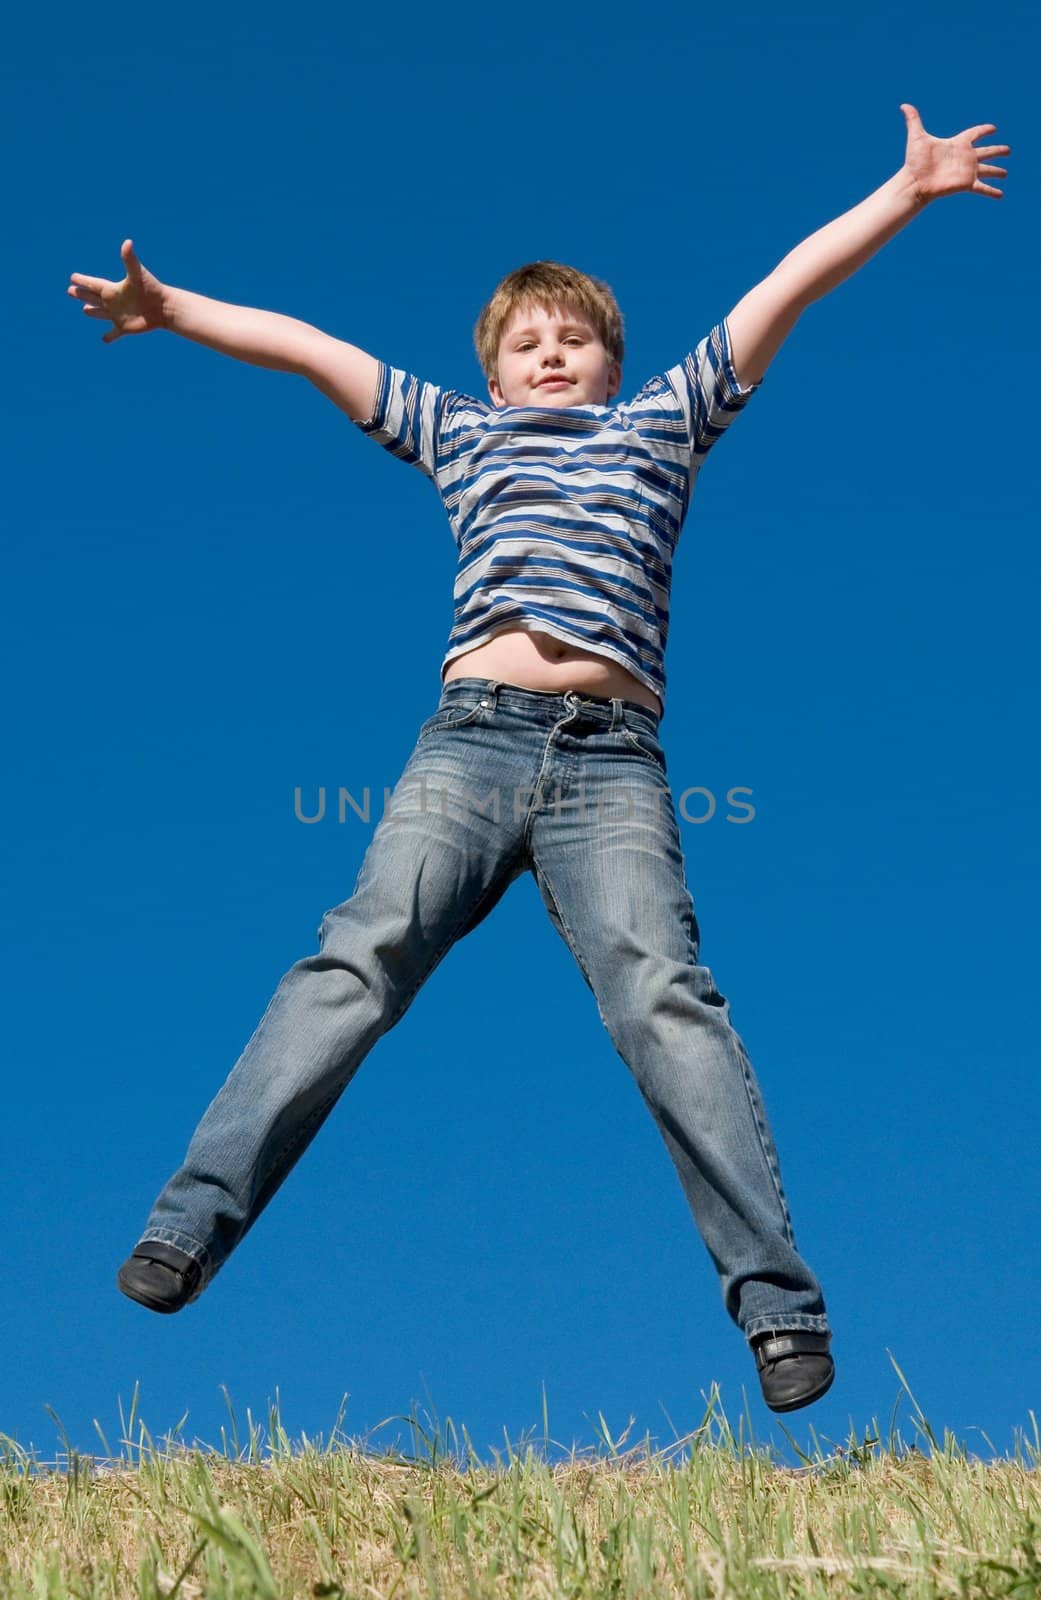 A little boy jumps with sky at background